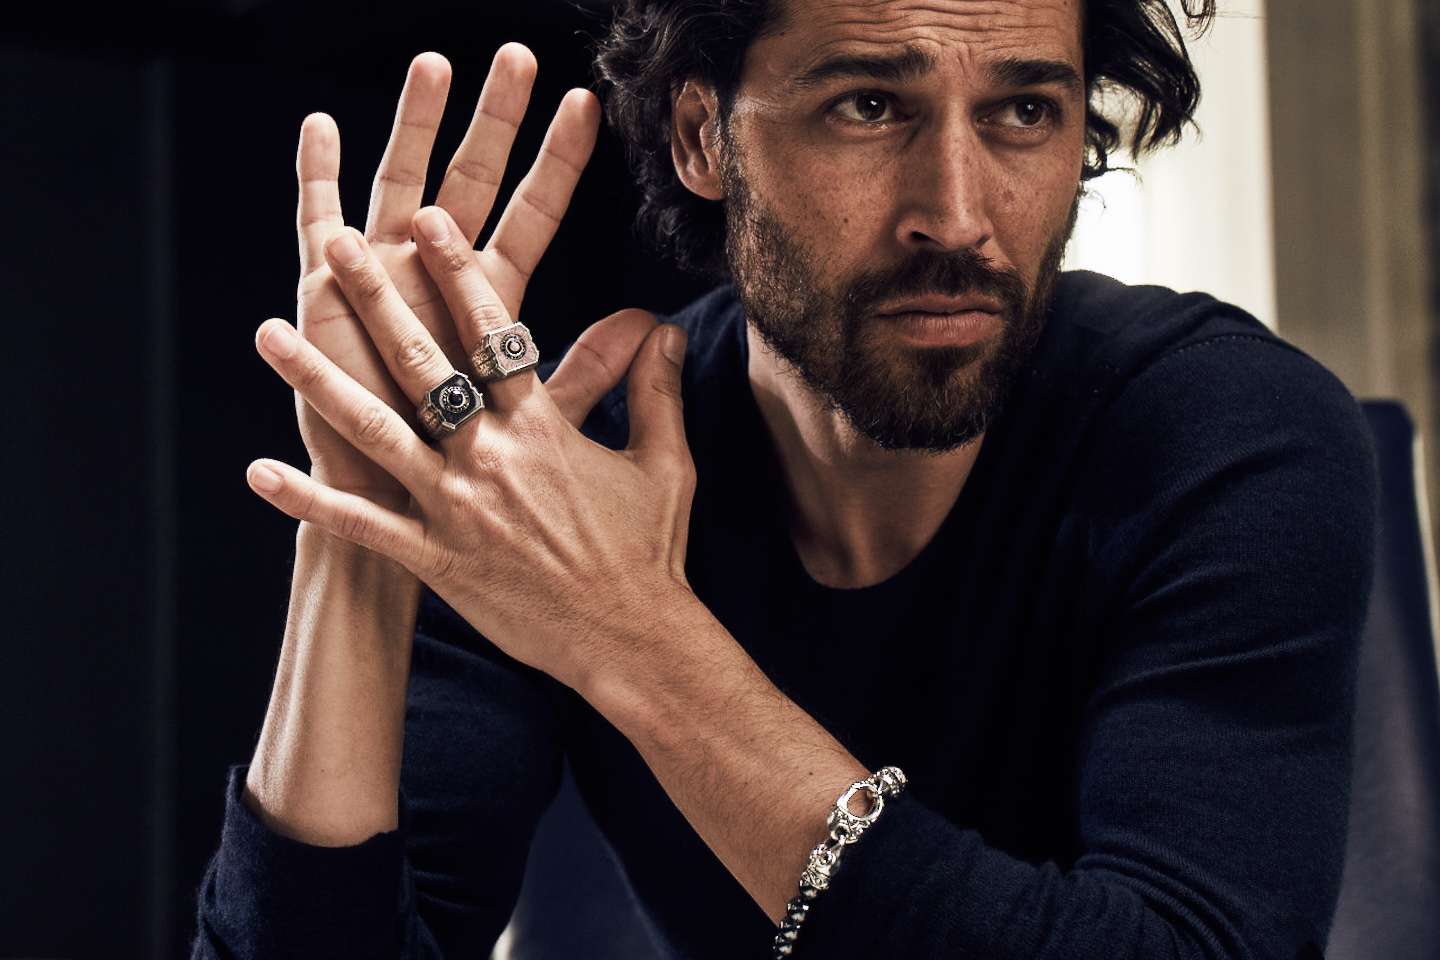 Once the domain of the rock or sports star, men’s jewellery is now all-access